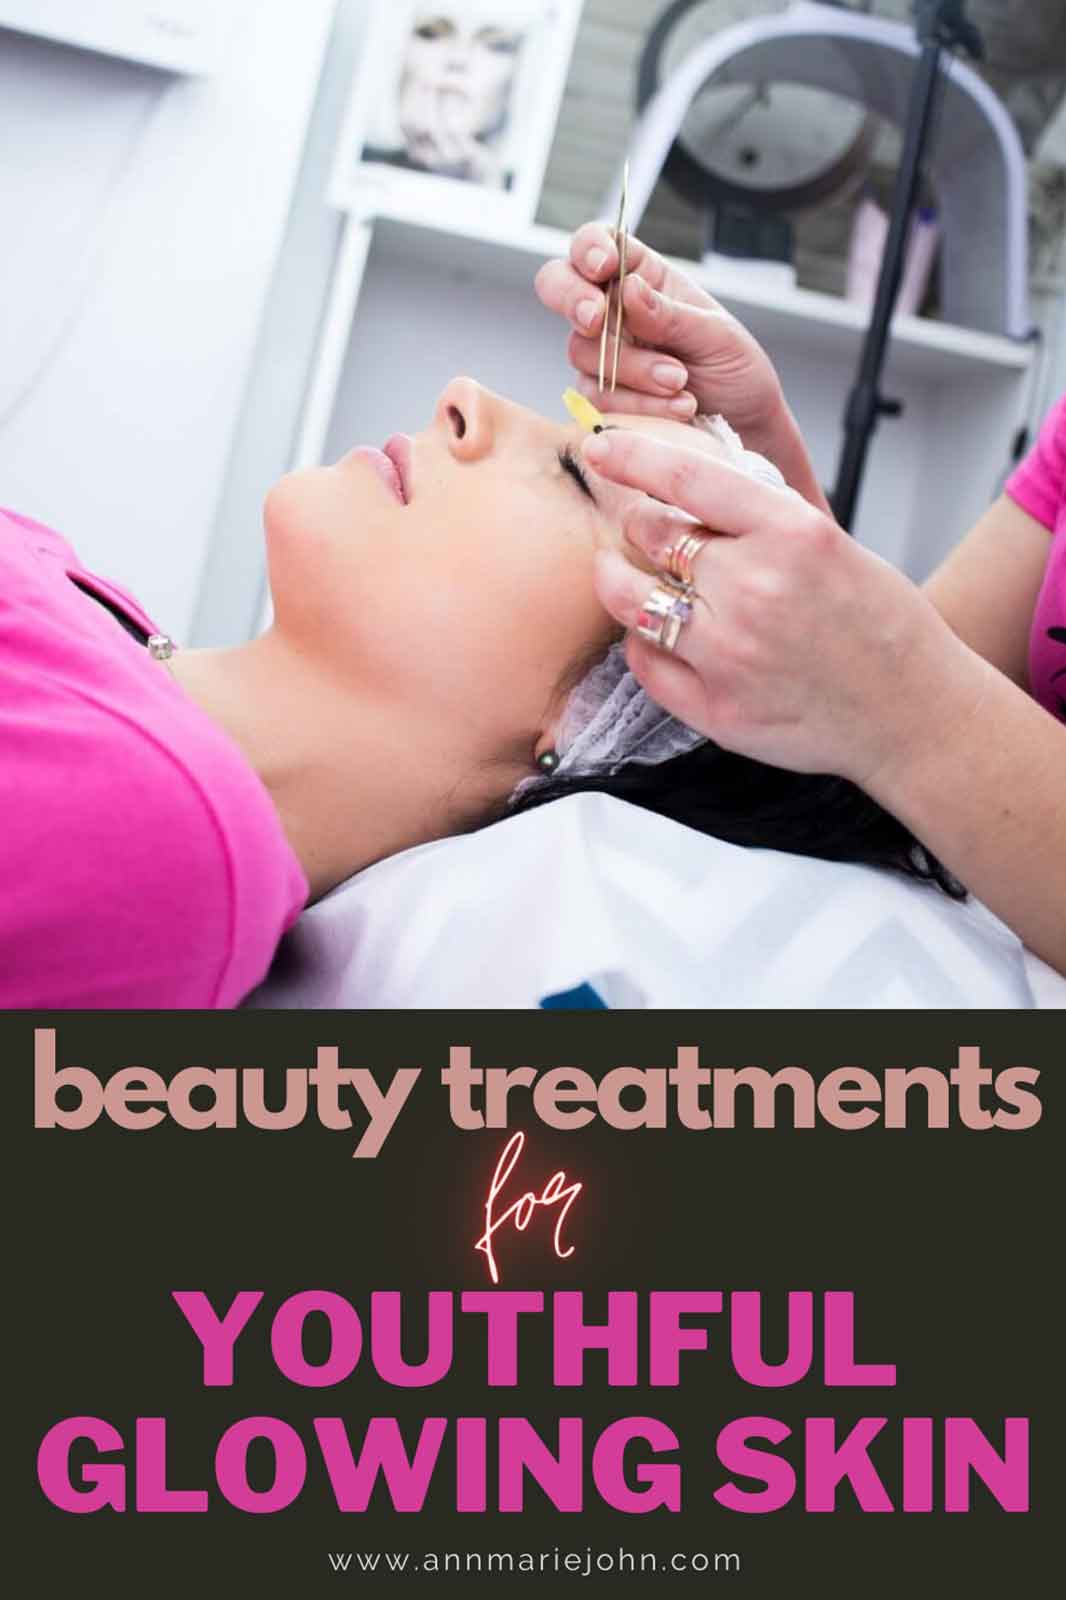 Beauty Treatments to Keep Your Youthful and Glowing Skin